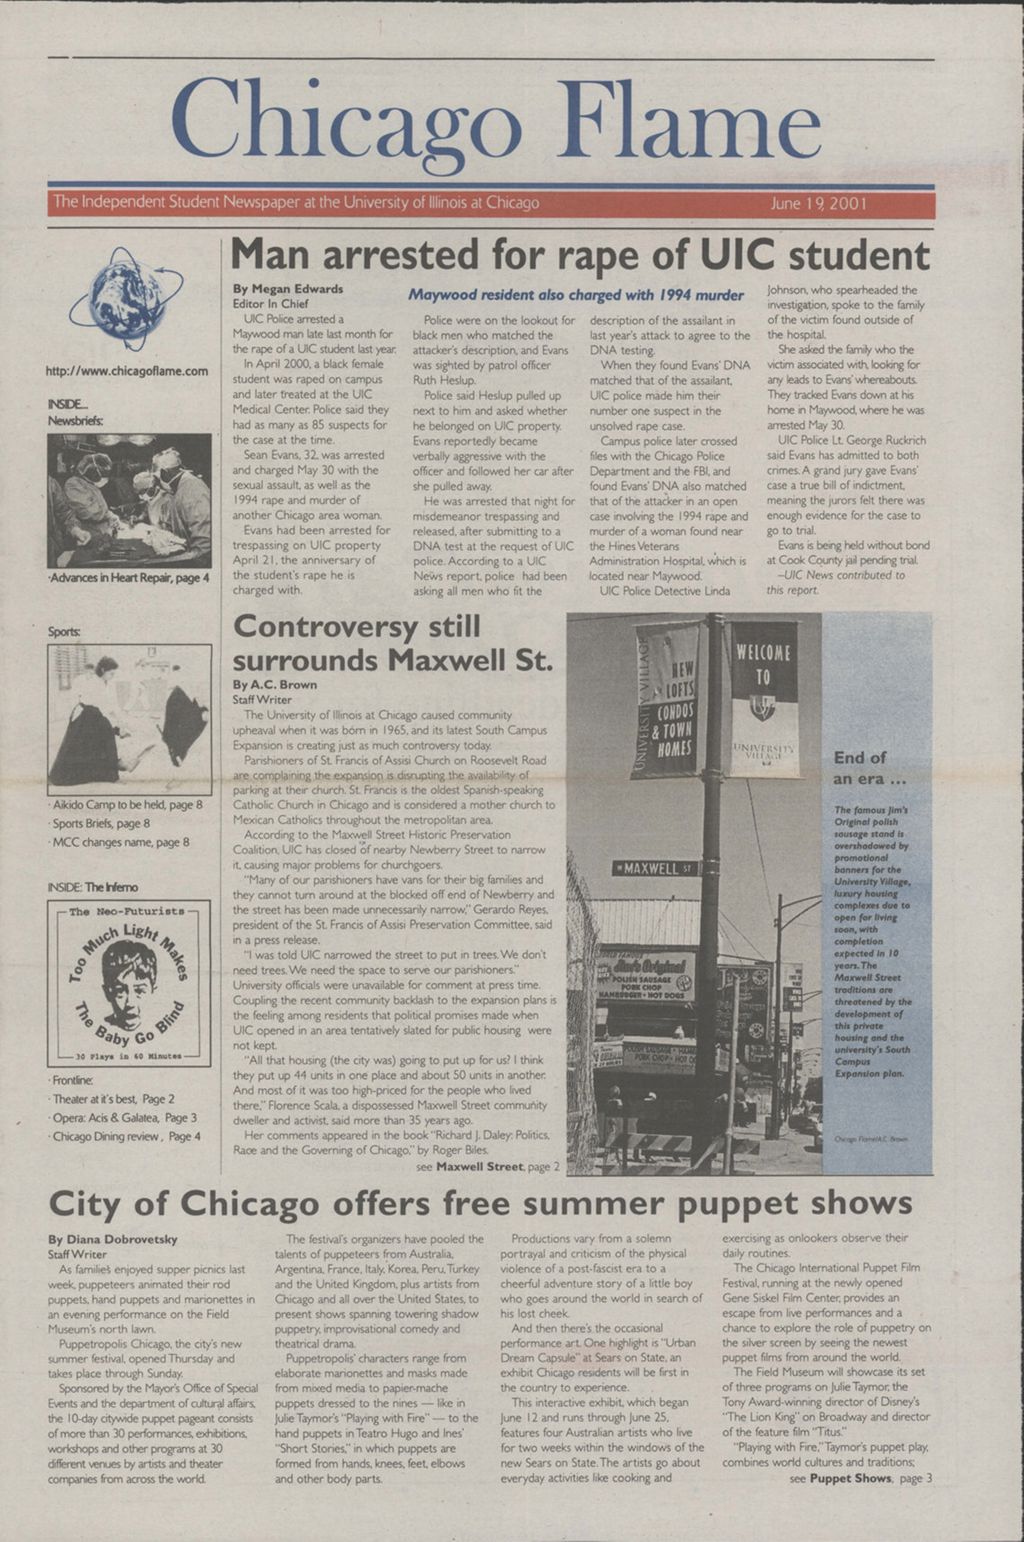 Chicago Flame (June 19, 2001)